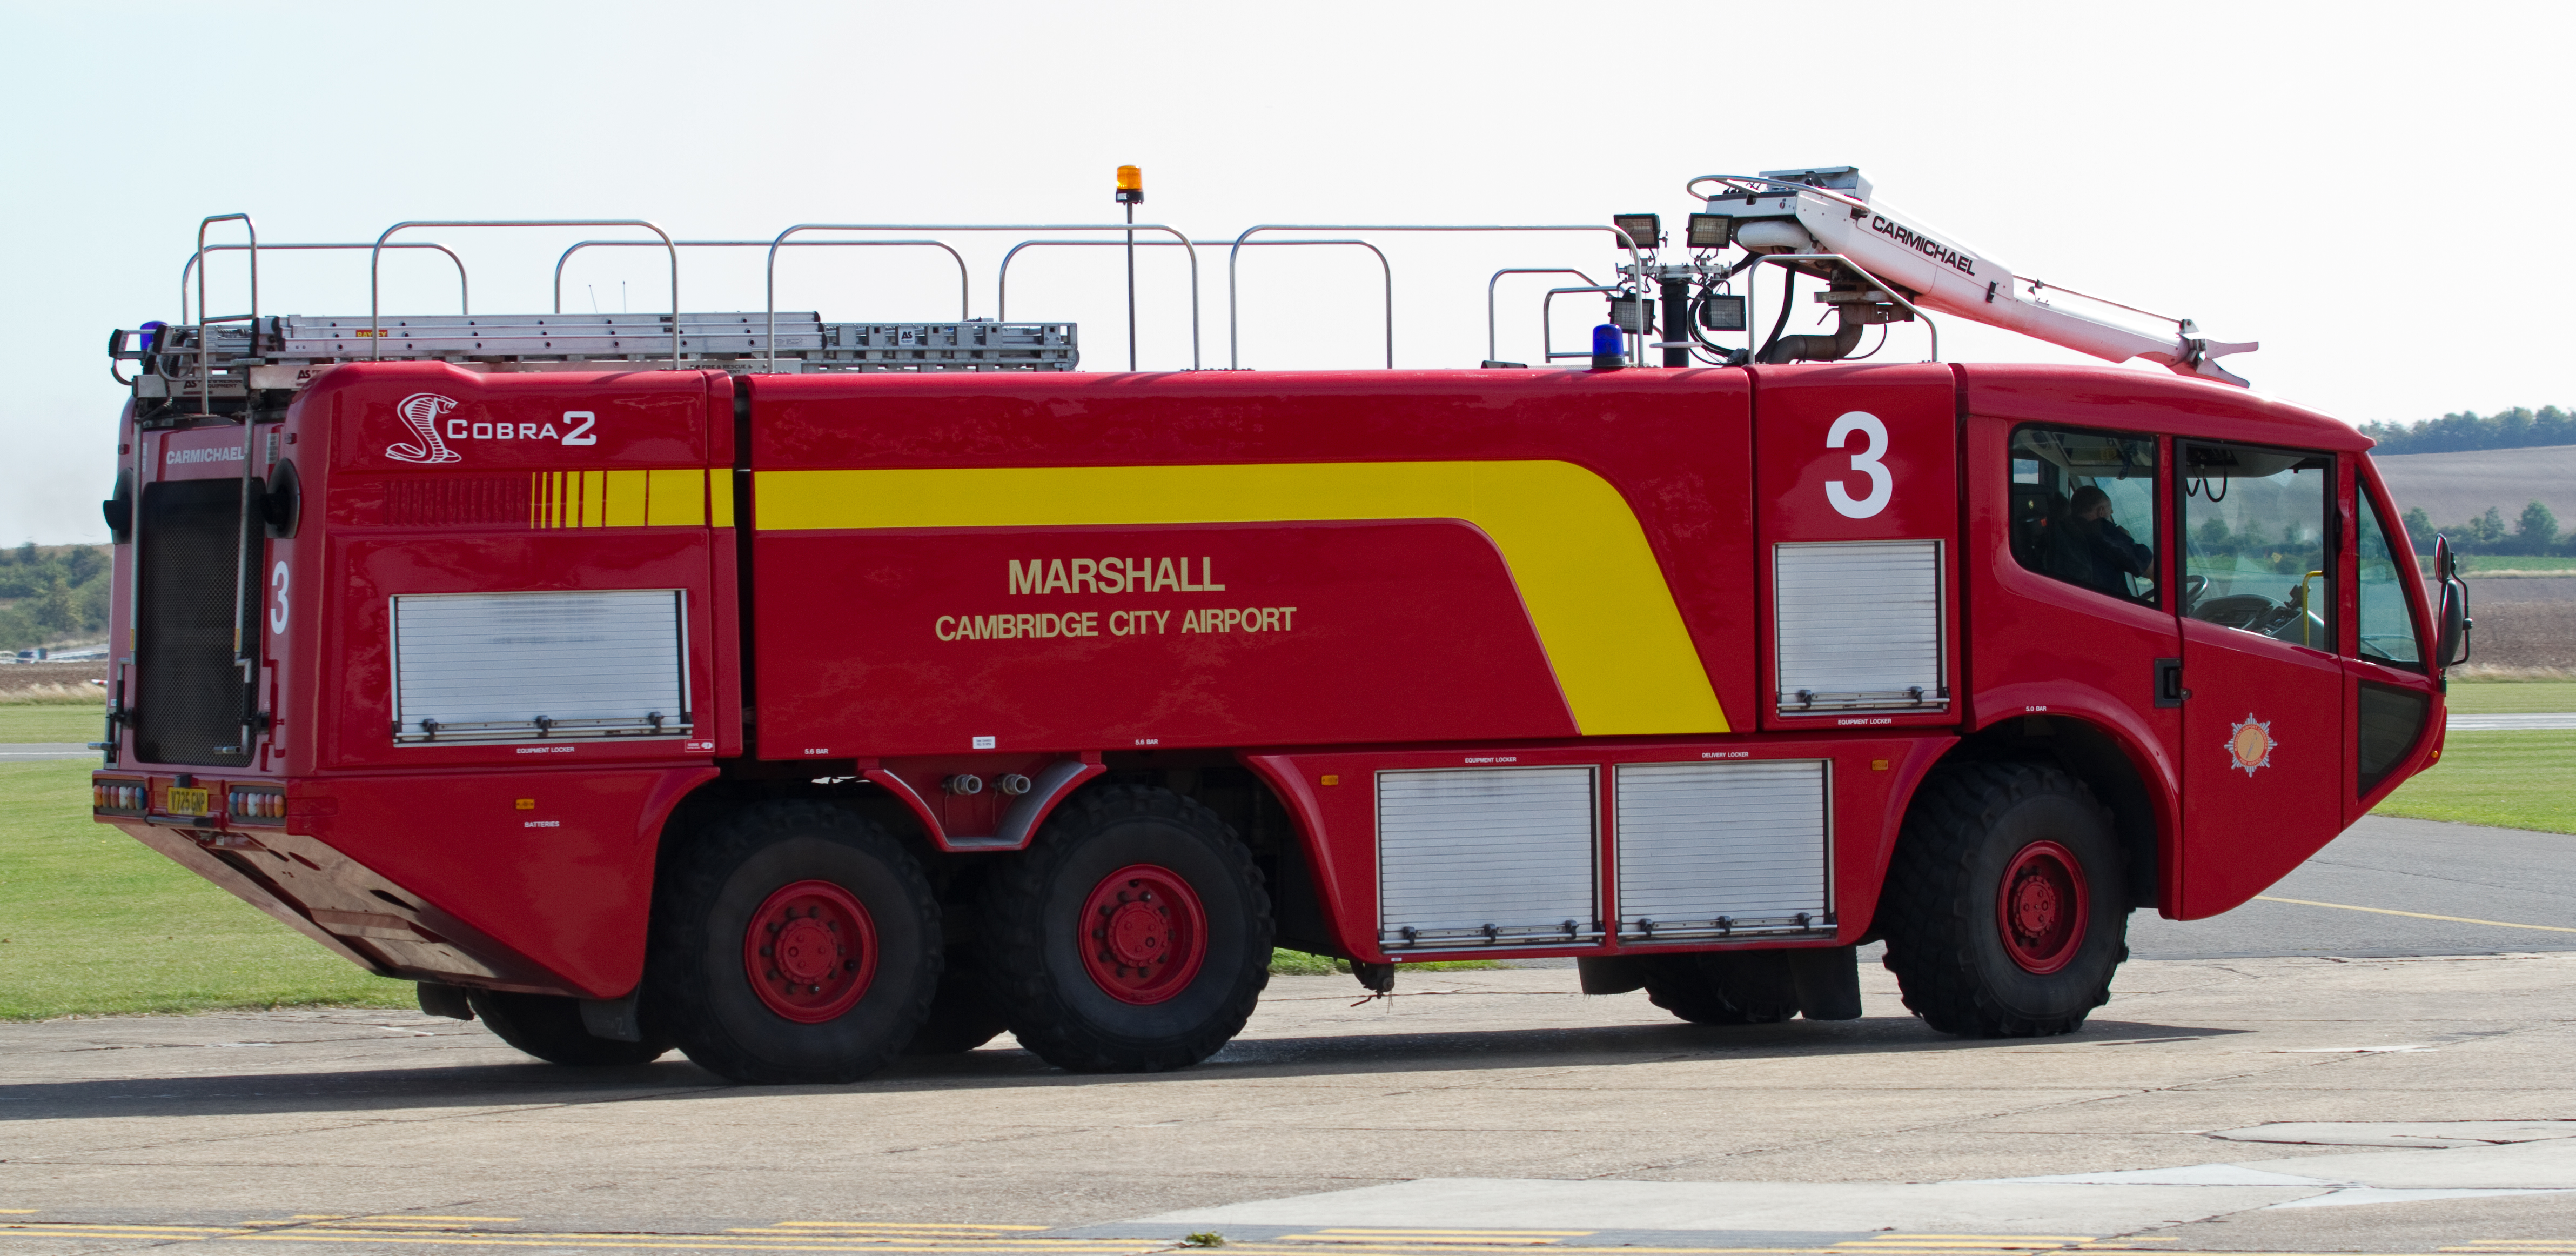 File:Airport Fire Engine (6114407534).jpg - Wikimedia Commons